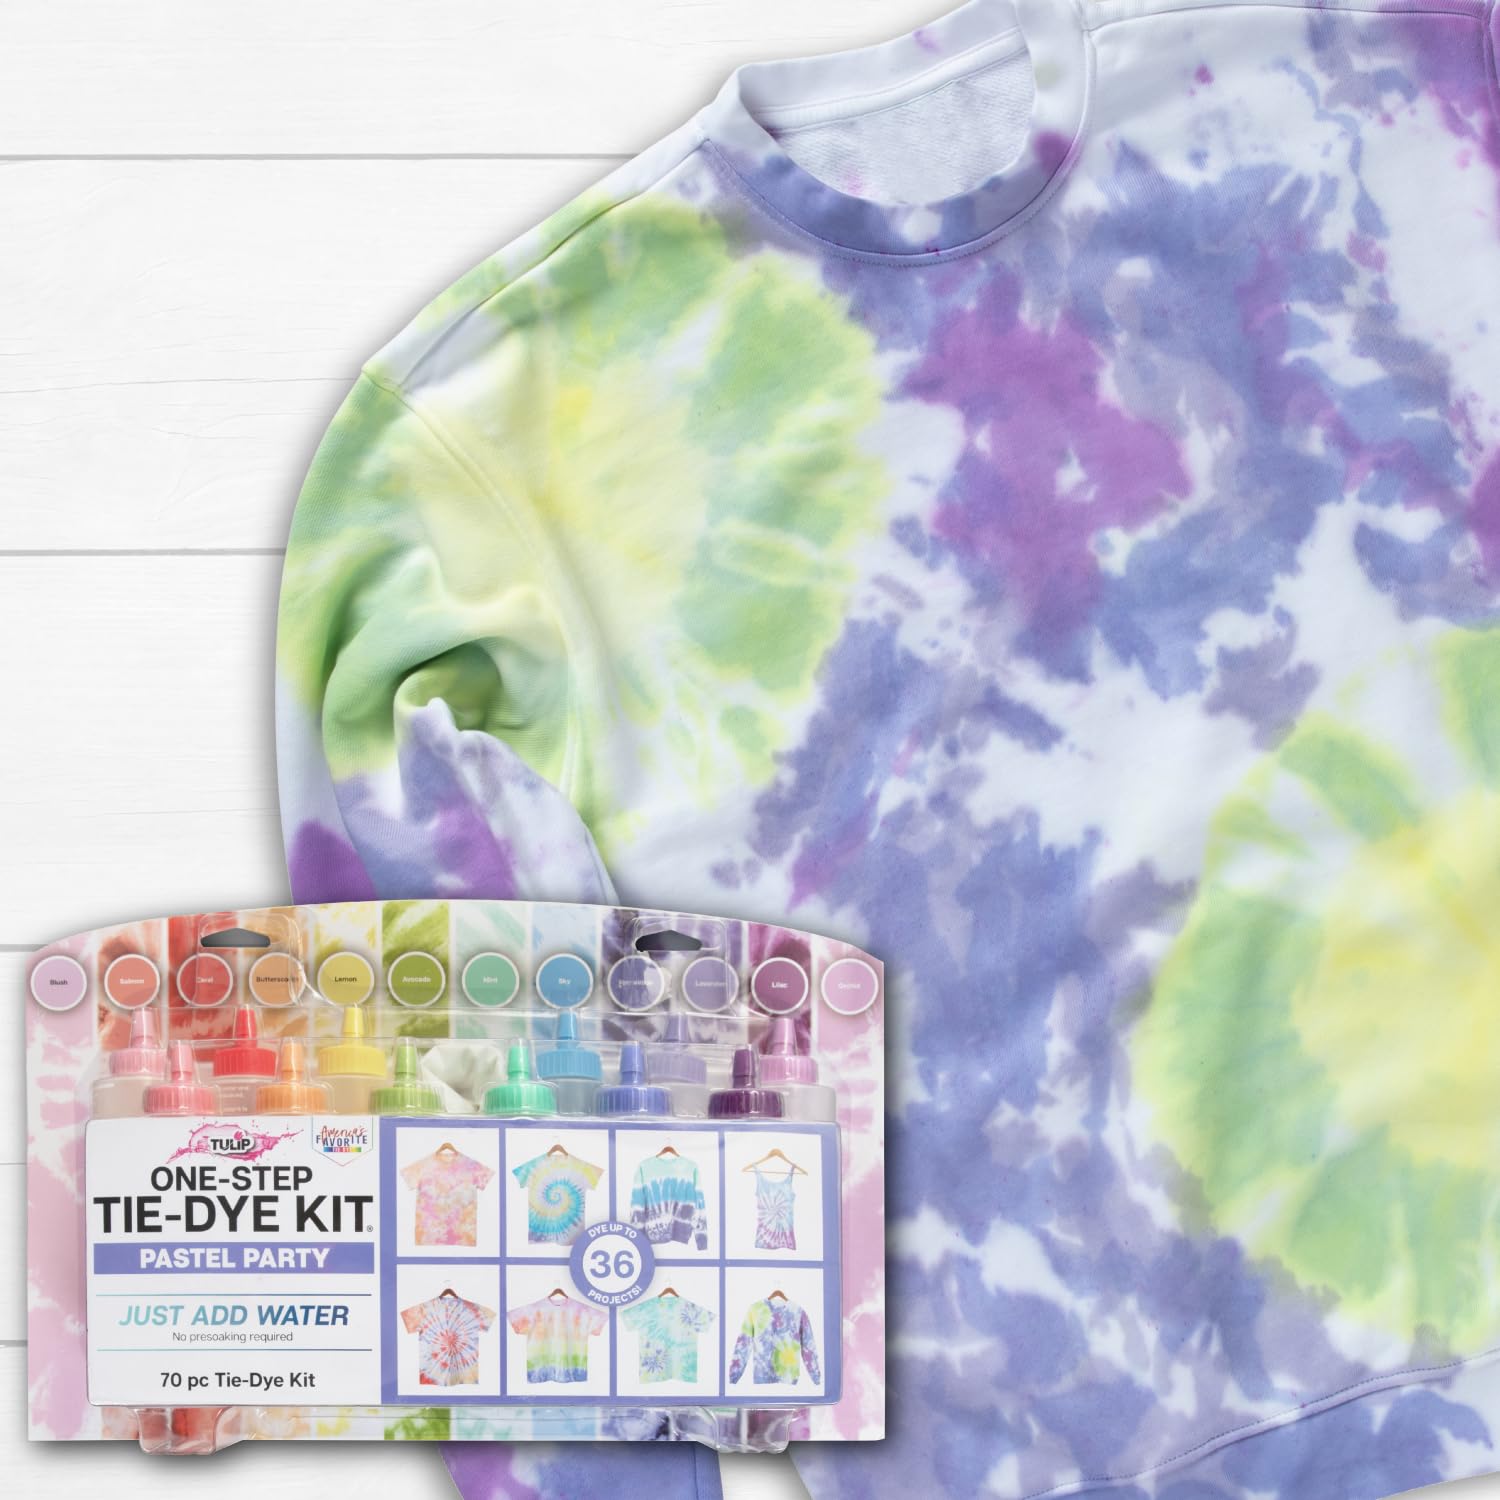 Tulip One-Step Tie-Dye Pastel Party Kit, Easy Group Activity, Permanent Designs, 12 Colors